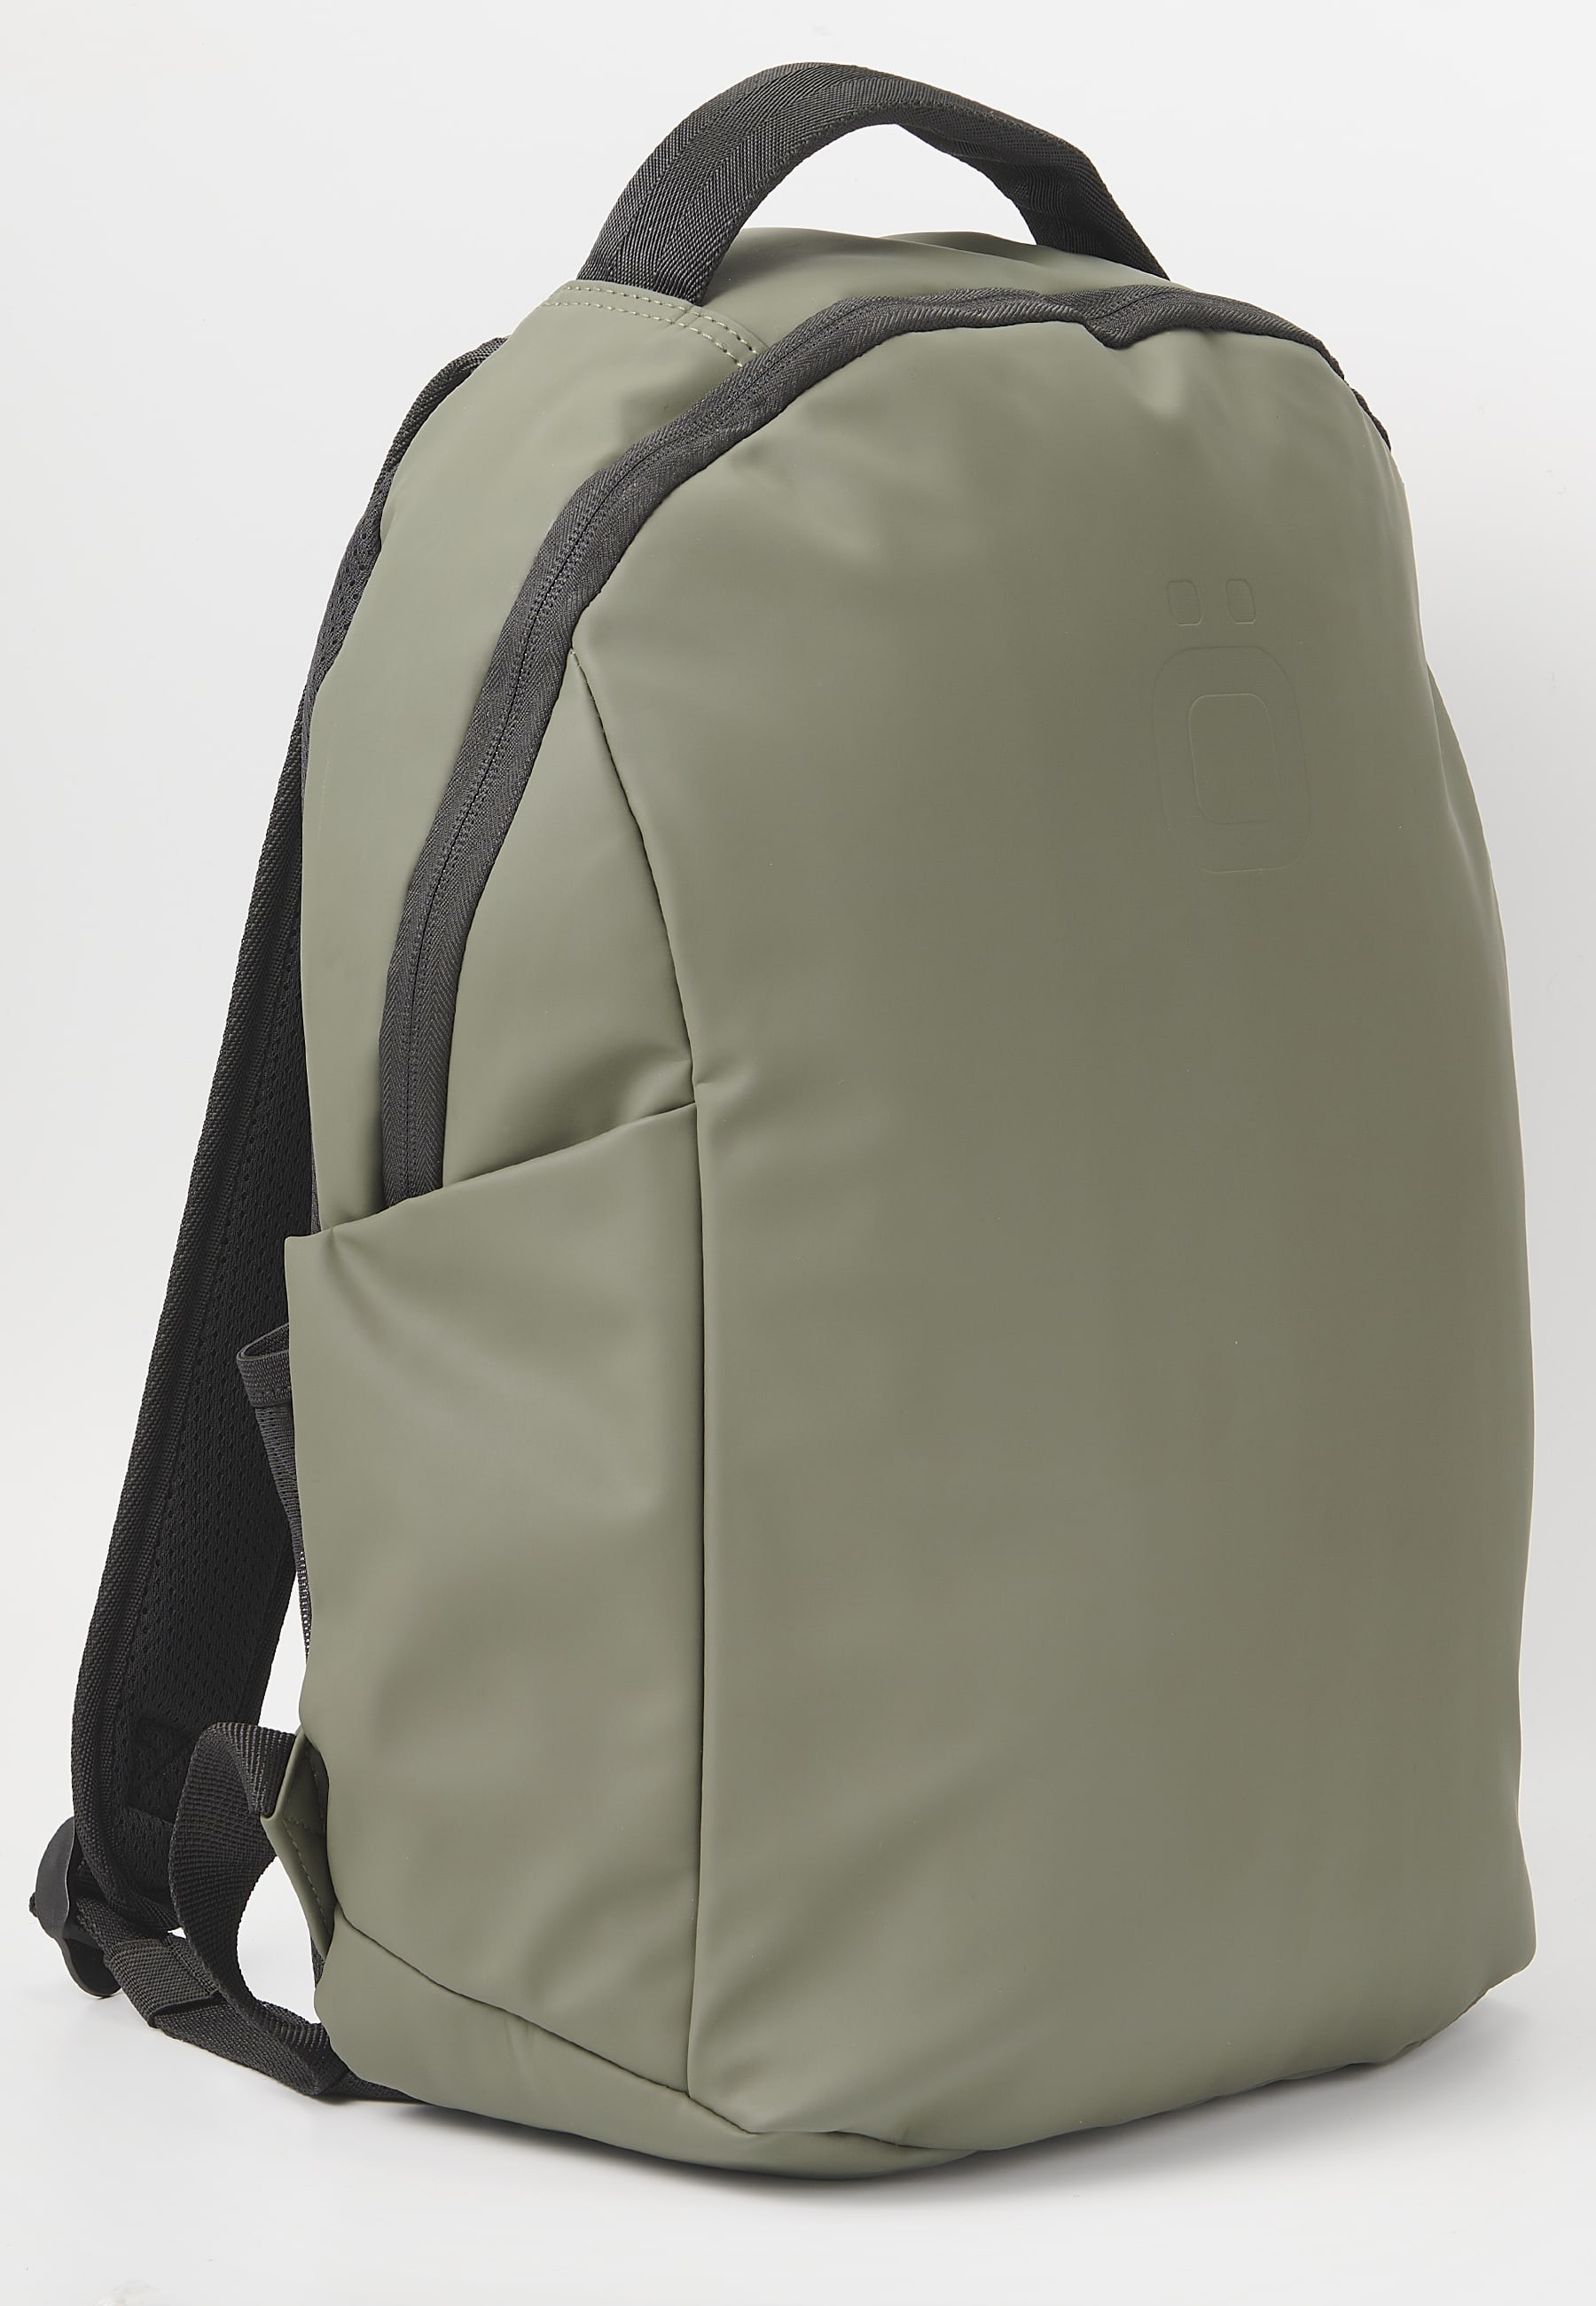 Koröshi Backpack with zipper closure and interior laptop pocket in Khaki color